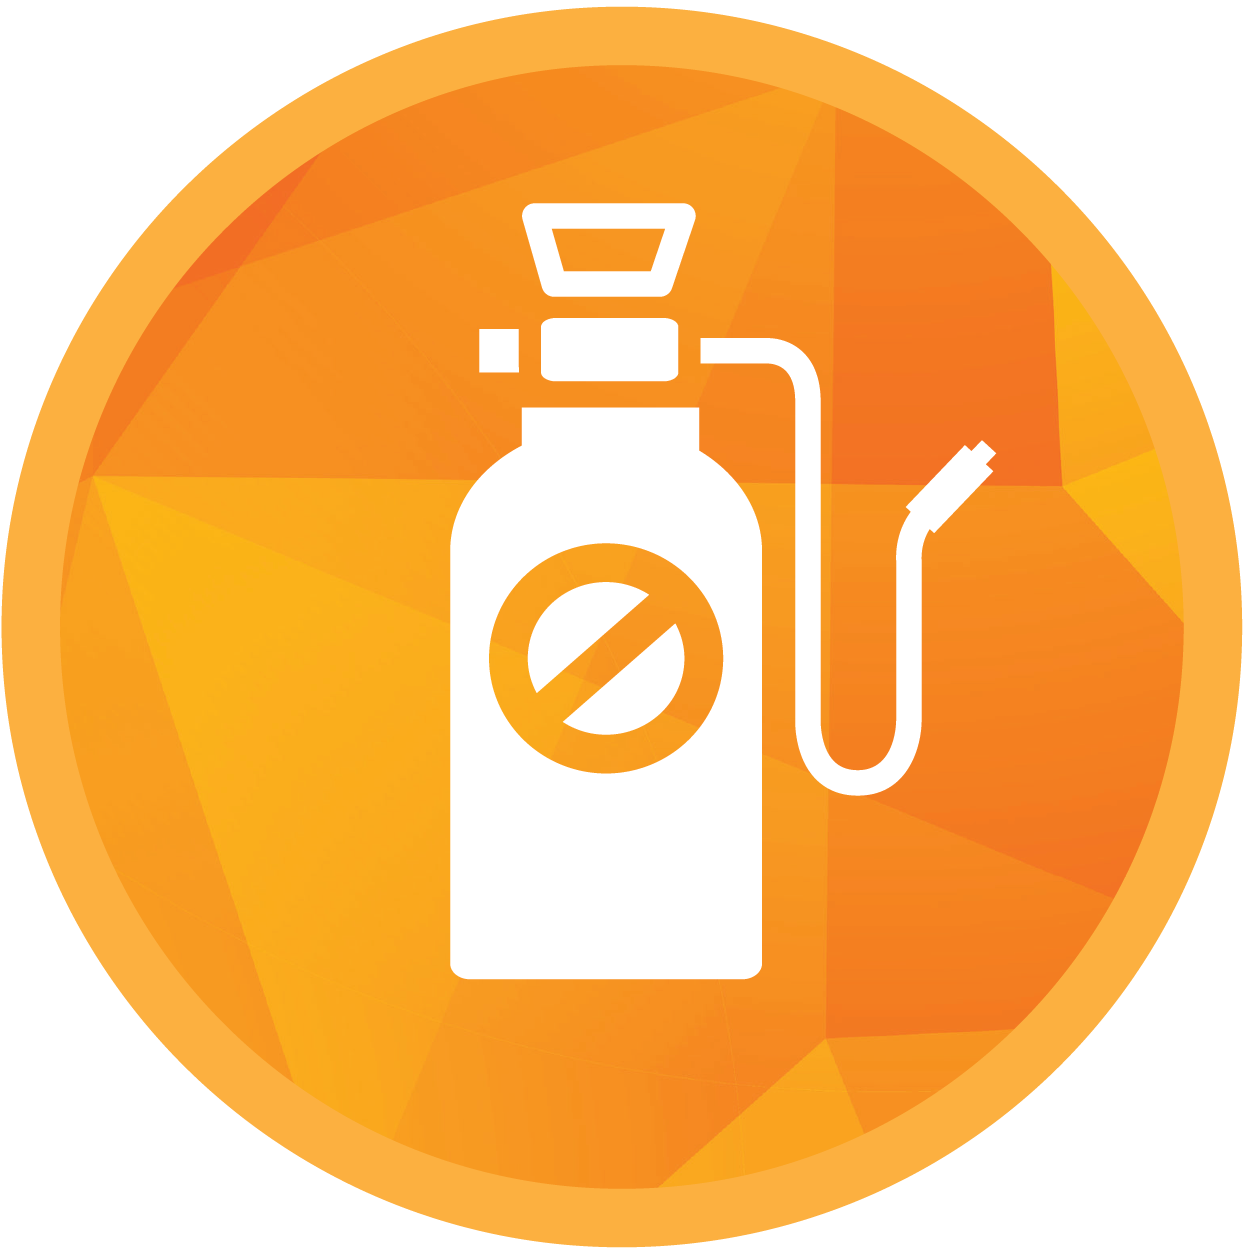 Circle icon of a pesticide sprayer with a no symbol on the can